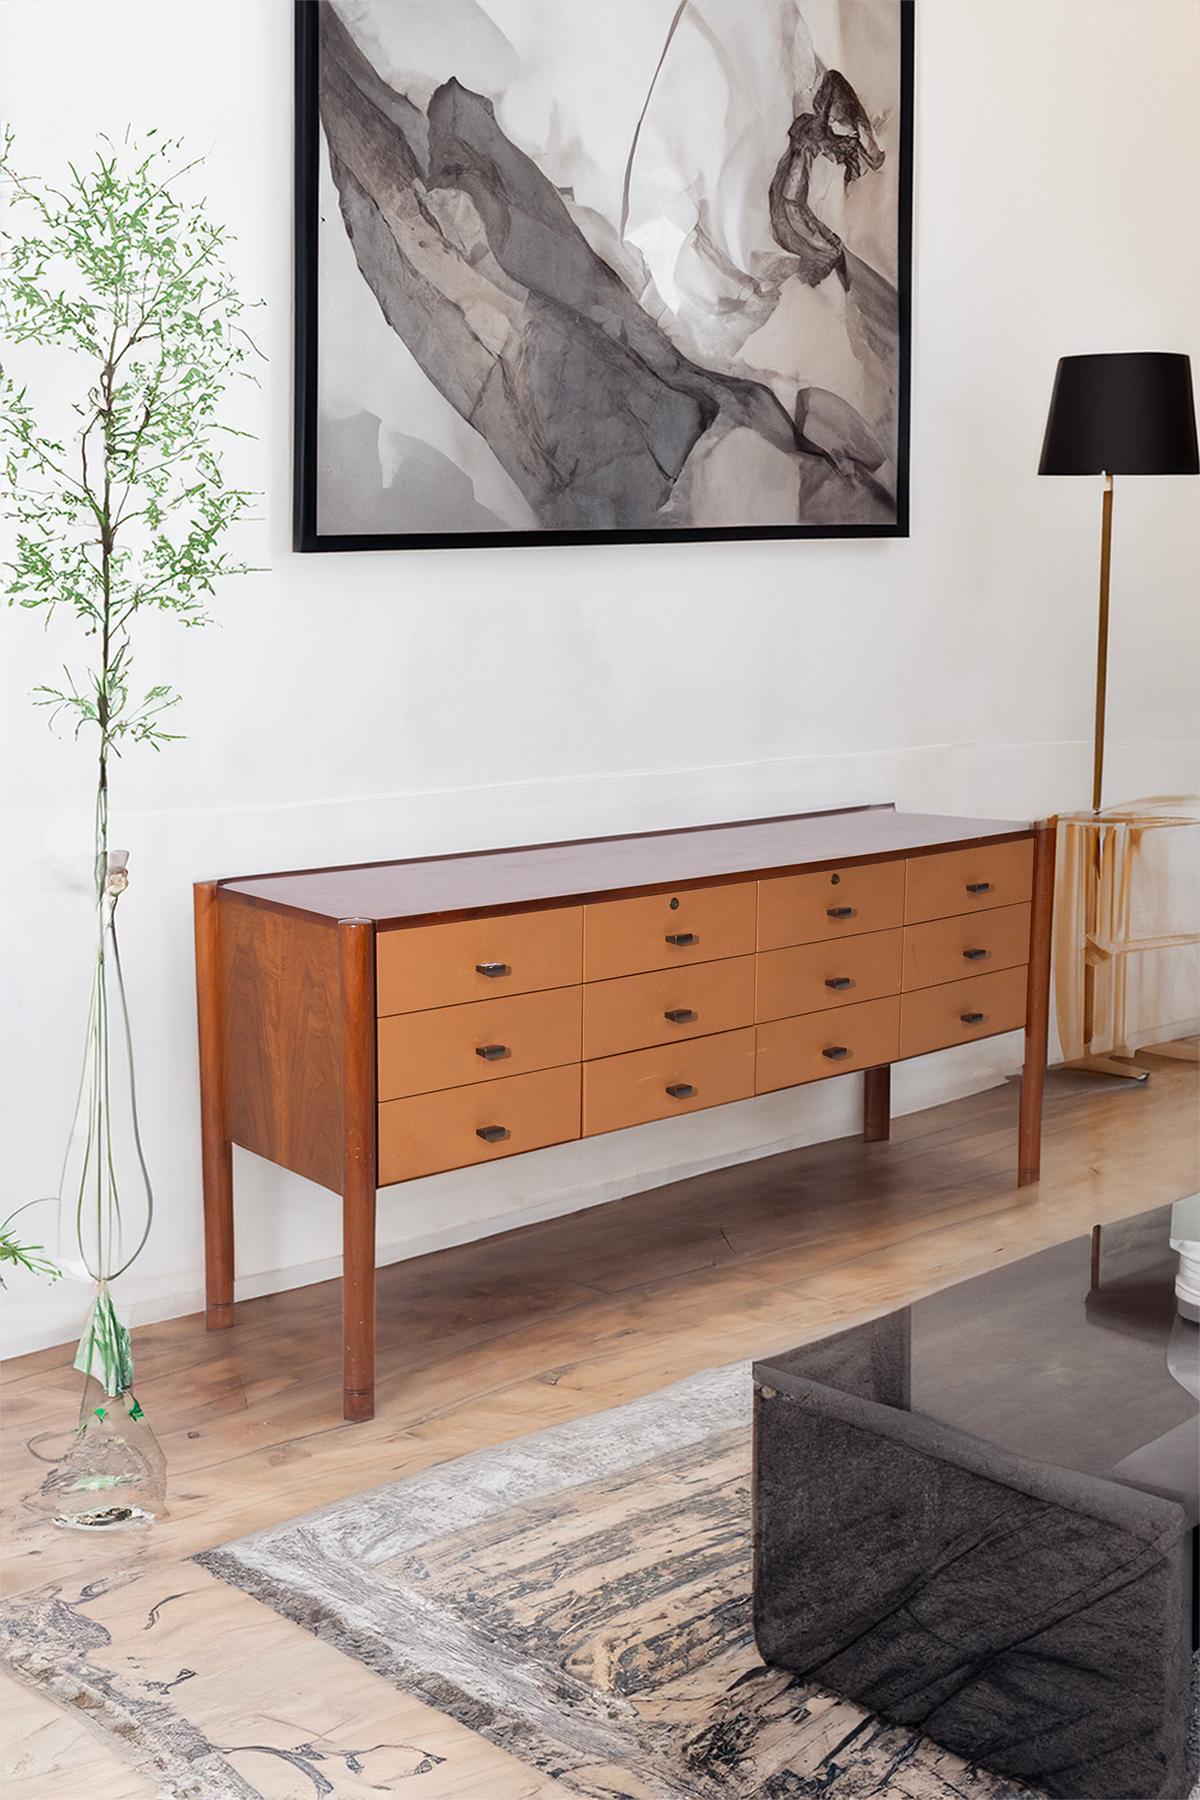 At the heart of vintage elegance lies a rare gem from the 1950s-60s: the Italian leather sideboard by the masterful Osvaldo Borsani. Precision crafted and imbued with timeless charm, this sideboard is a testament to Italian design at its best.
As